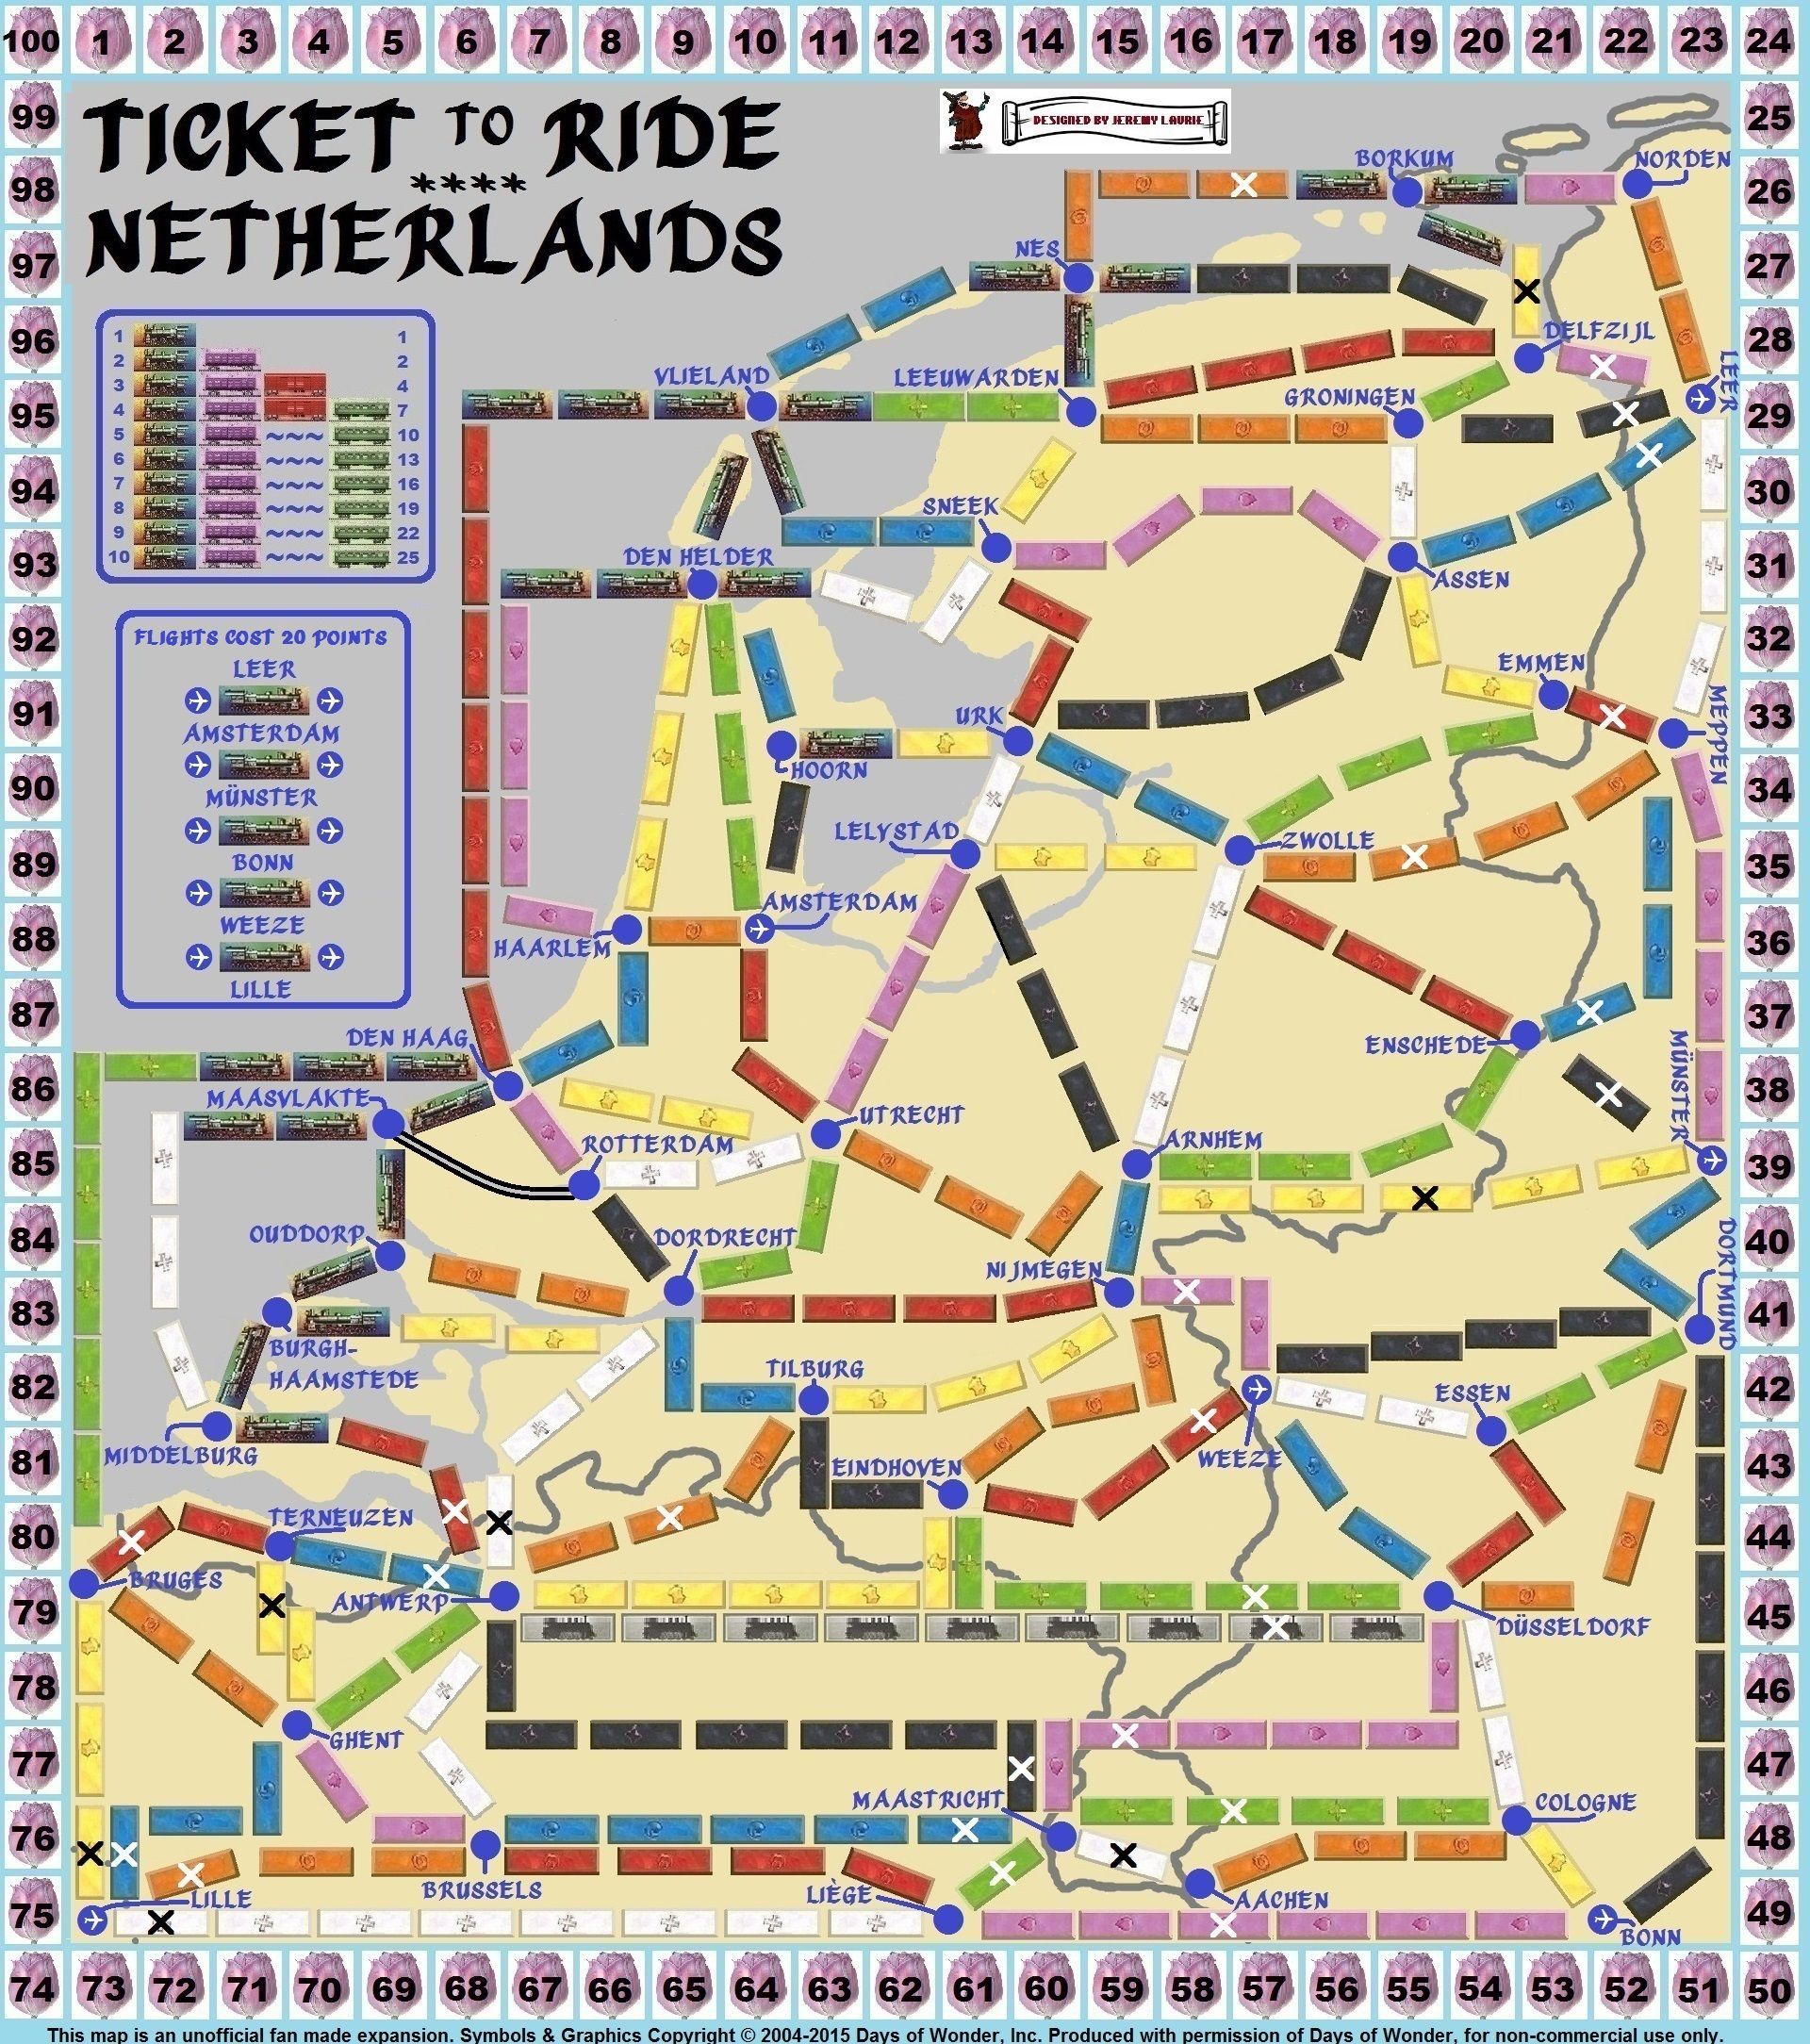 Netherlands (fan expansion for Ticket to Ride)